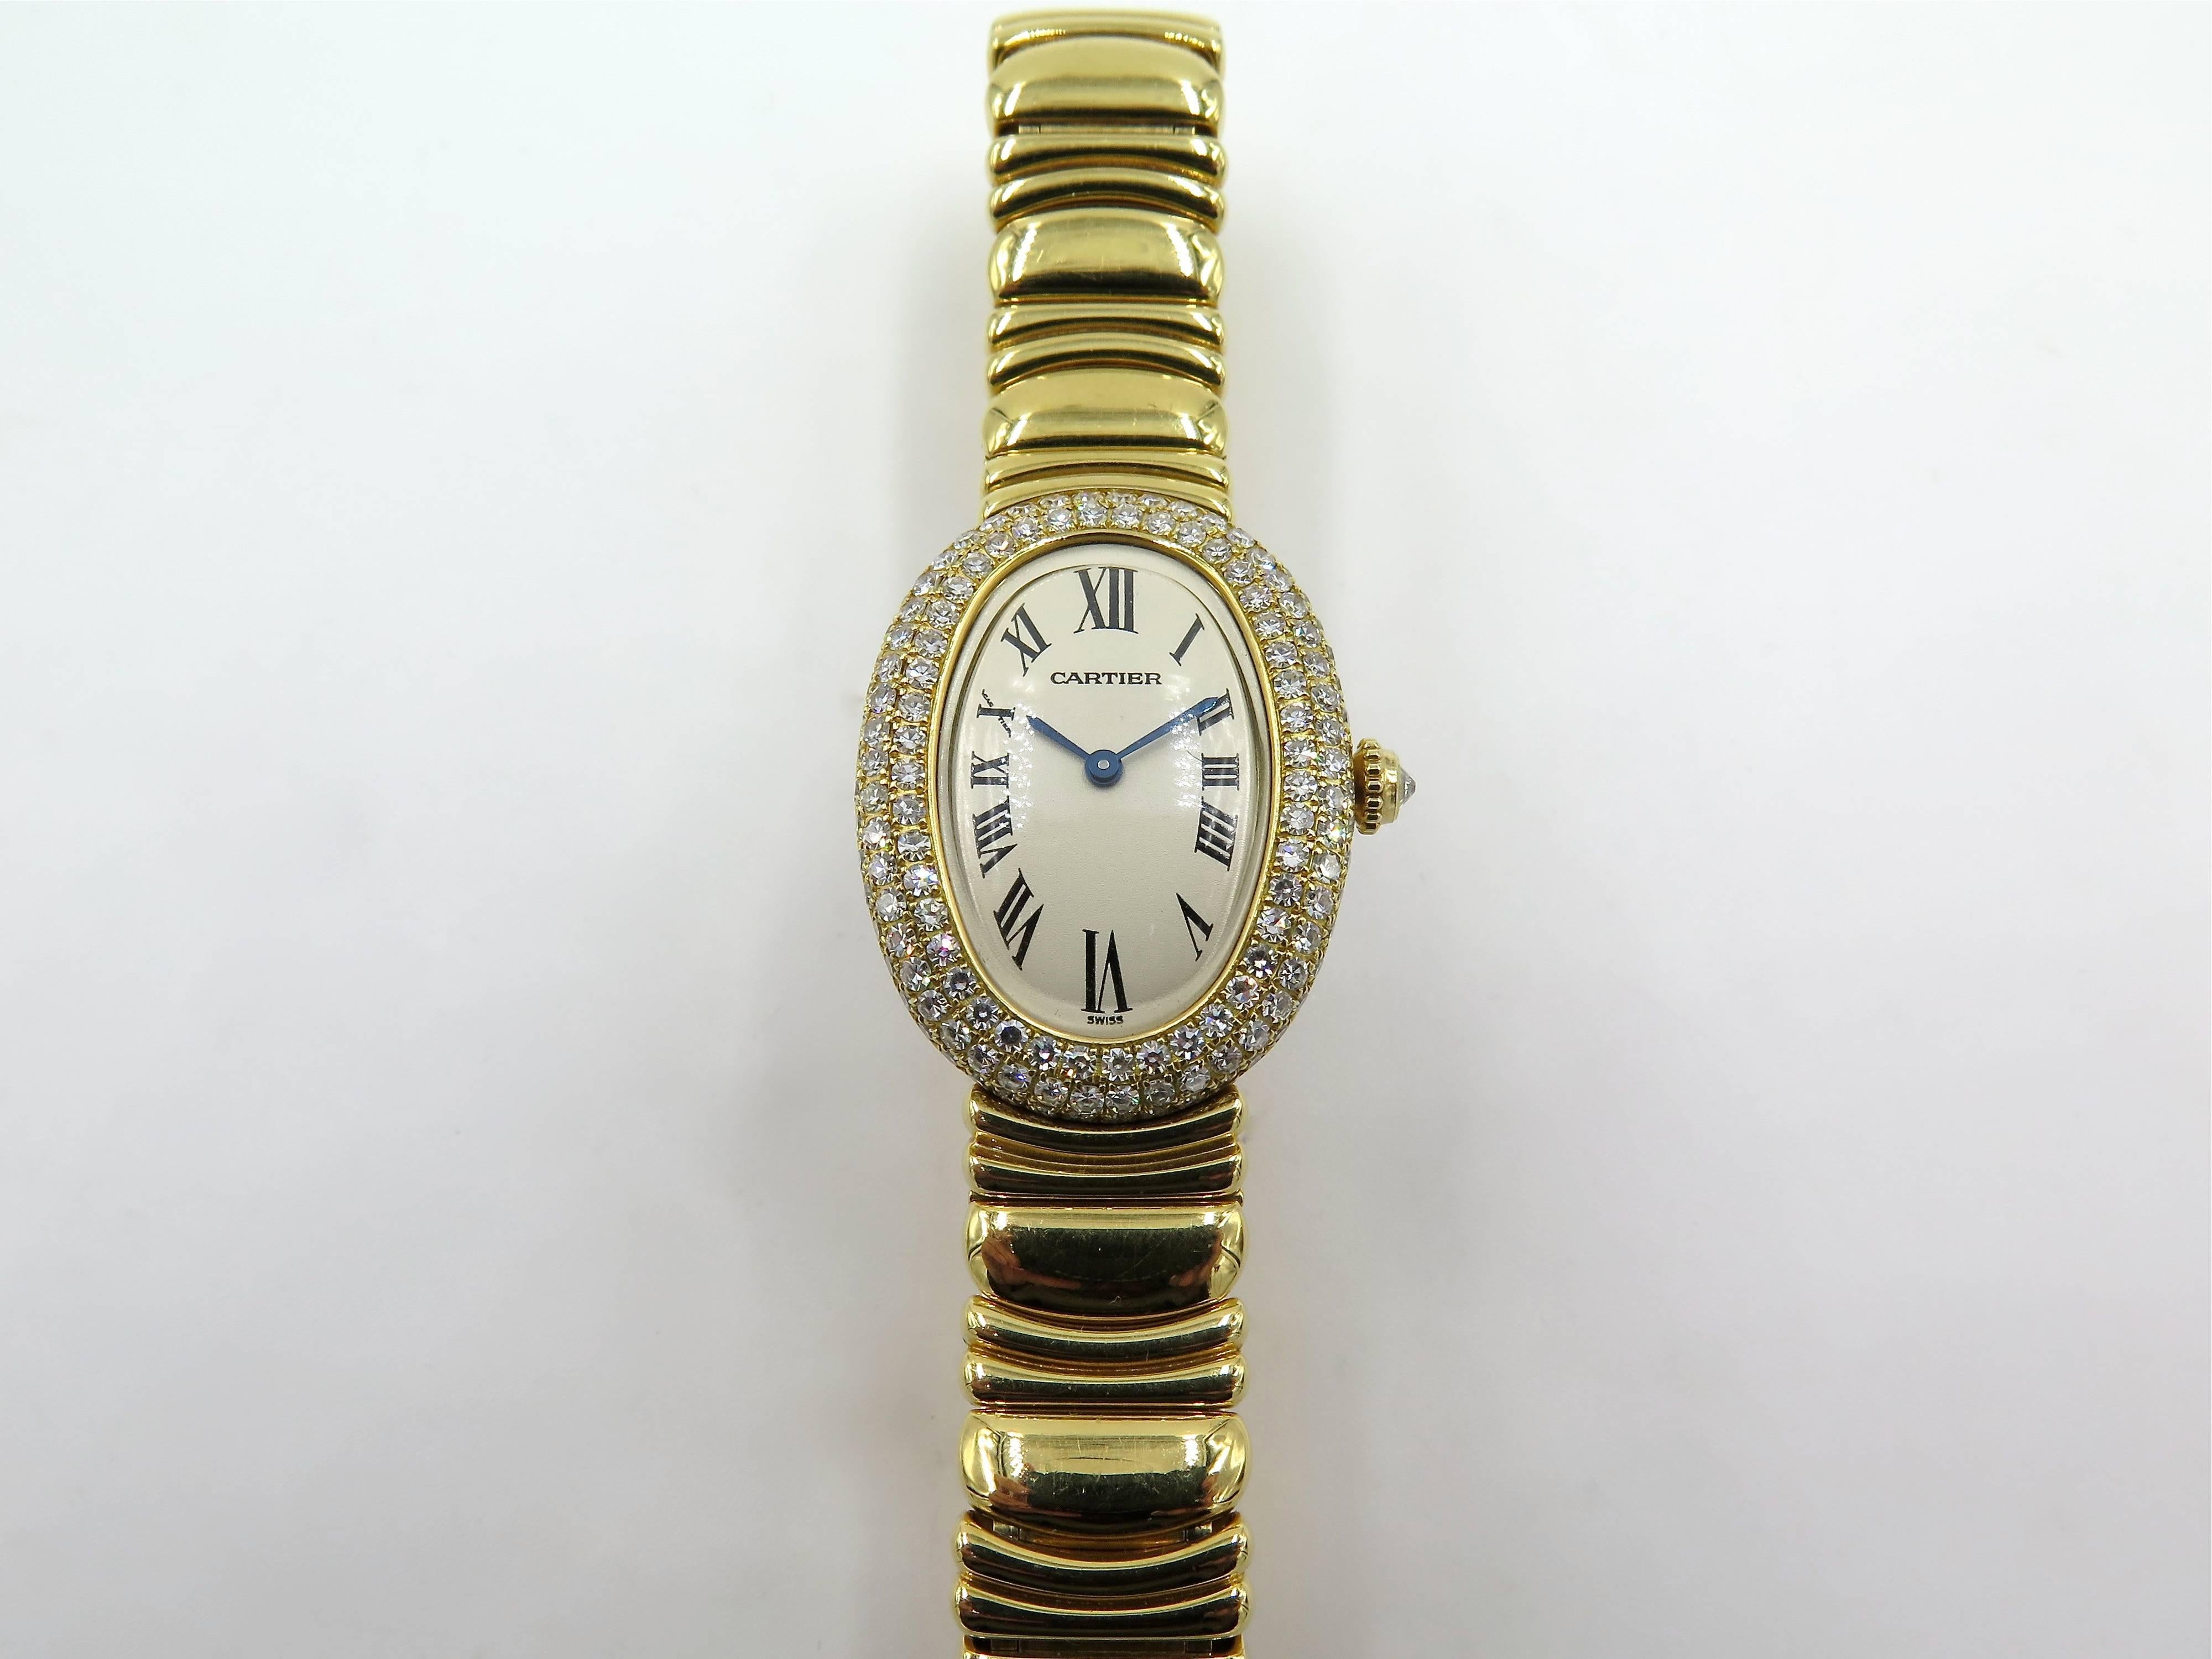 An 18 karat yellow gold ladies Cartier and diamond watch.  Baignoire model.  Serial number 29158057912. Of quartz movement, the white oval dial with black Roman numerals and blued steel hands, secret signature at 10 o'clock, with pave set diamond